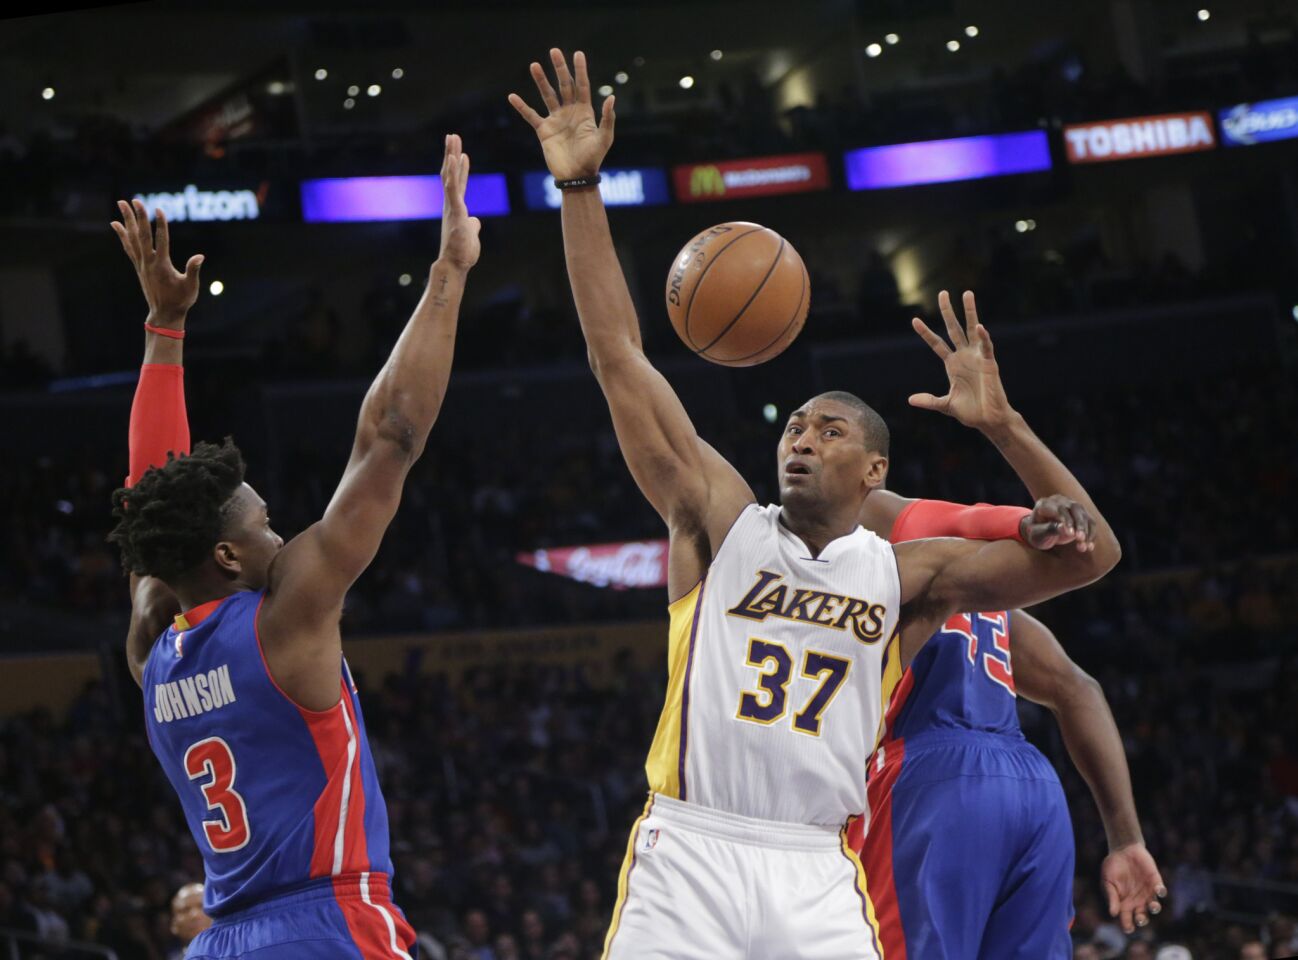 Lakers forward Metta World Peace is fouled by Pistons forward Anthony Tolliver while working against forward Stanley Johnson in the first half.